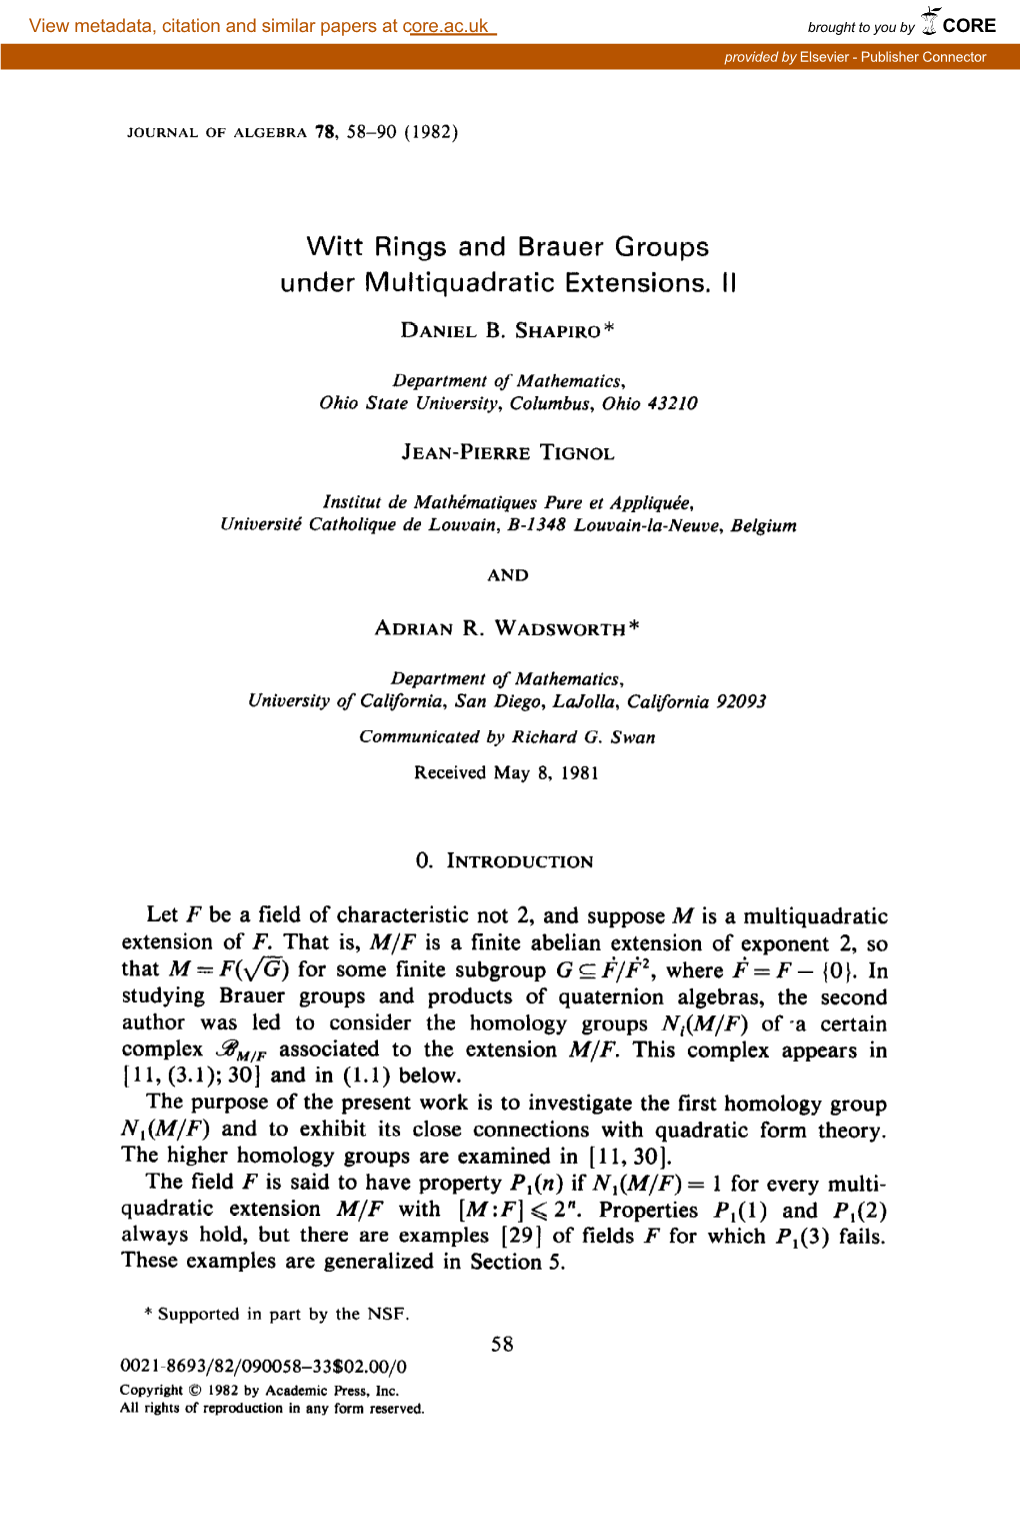 Witt Rings and Brauer Groups Under Multiquadratic Extensions. II DANIEL B